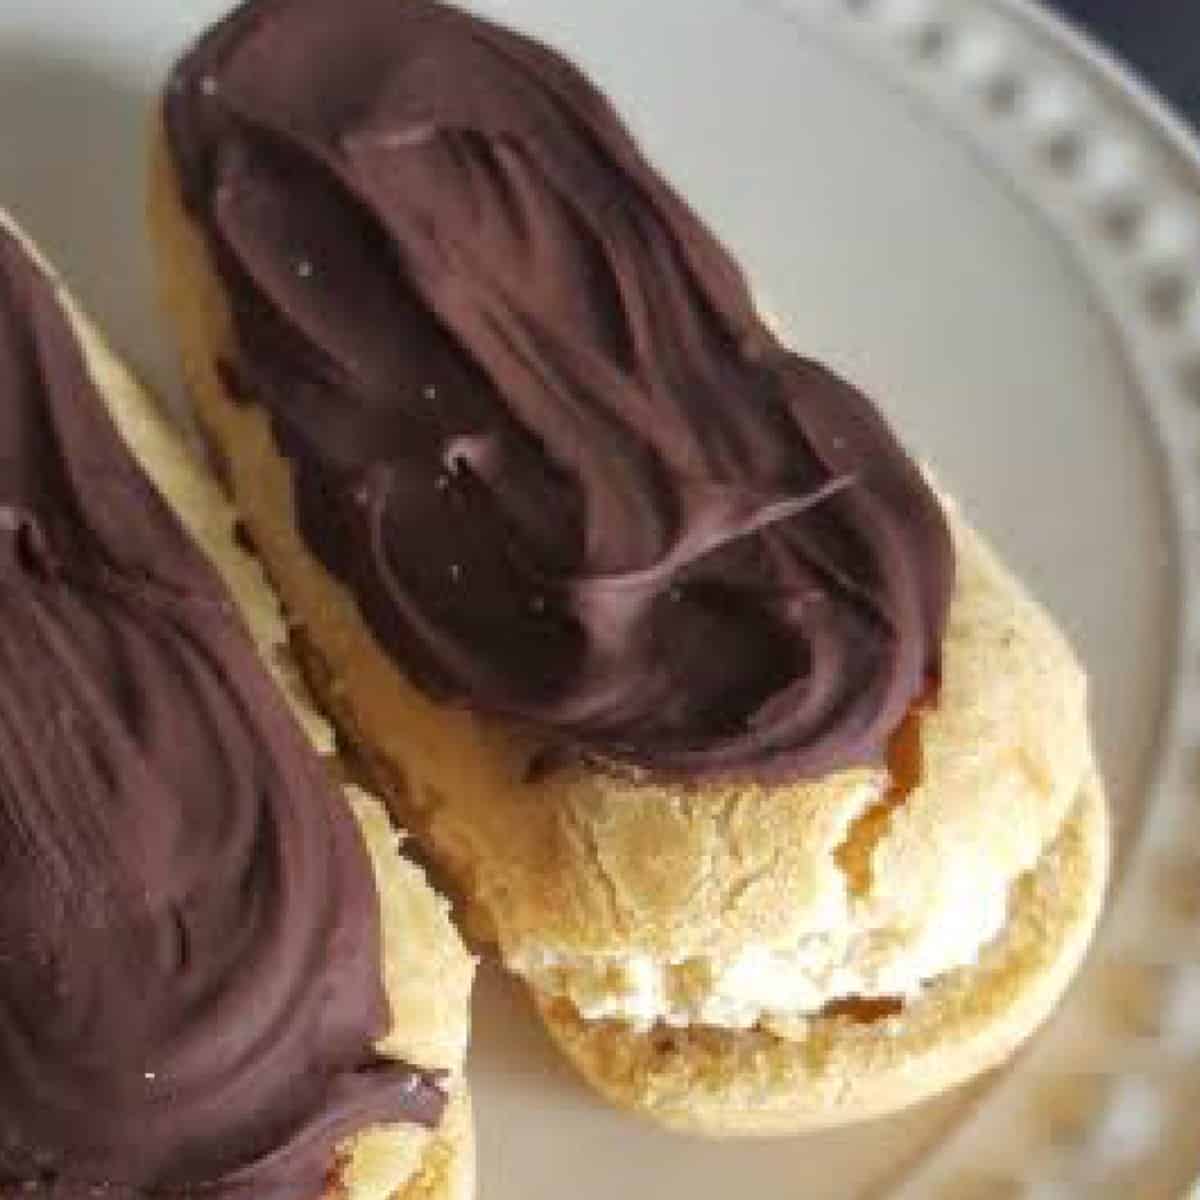 These gluten-free éclairs are a delicious and decadent treat that everyone can enjoy. They are made with plant-based ingredients, such as aquafaba (chickpea brine), gluten-free flour, and almond milk. The custard is typically made with tofu or silken tofu, and the ganache is made with vegan chocolate chips and coconut milk.

Gluten-free éclairs are just as delicious as traditional éclairs, but they are also healthier and more sustainable. They are a great option for people with dietary restrictions, as well as for people who are looking for a more environmentally-friendly dessert.